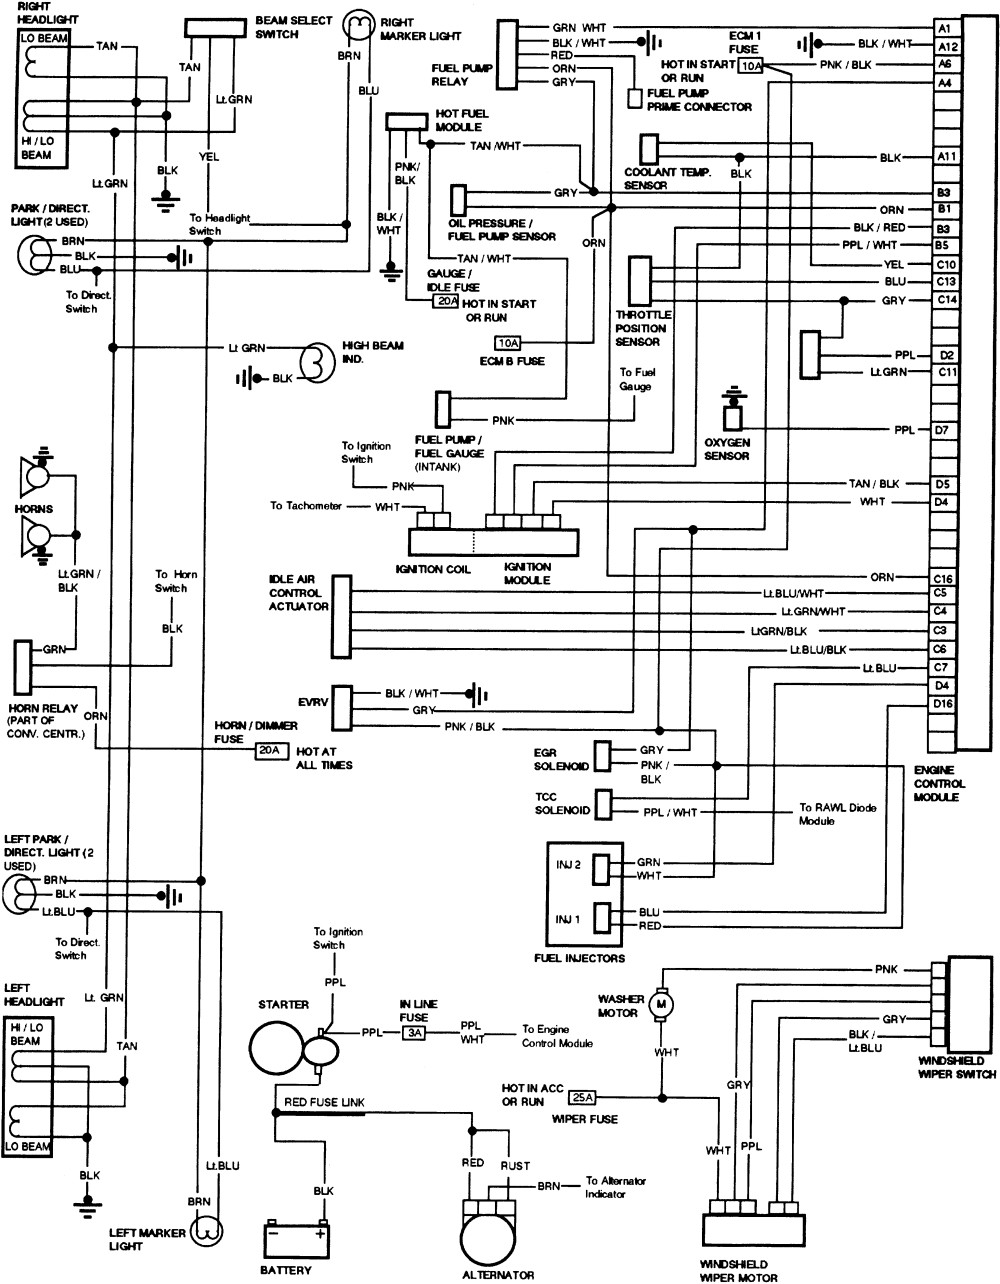 I Need Chevrolet P30 Chassis Wiring Diagrams Which I Expected To Be 1995 P30 Wiring Diagram P30 Wiring Diagram